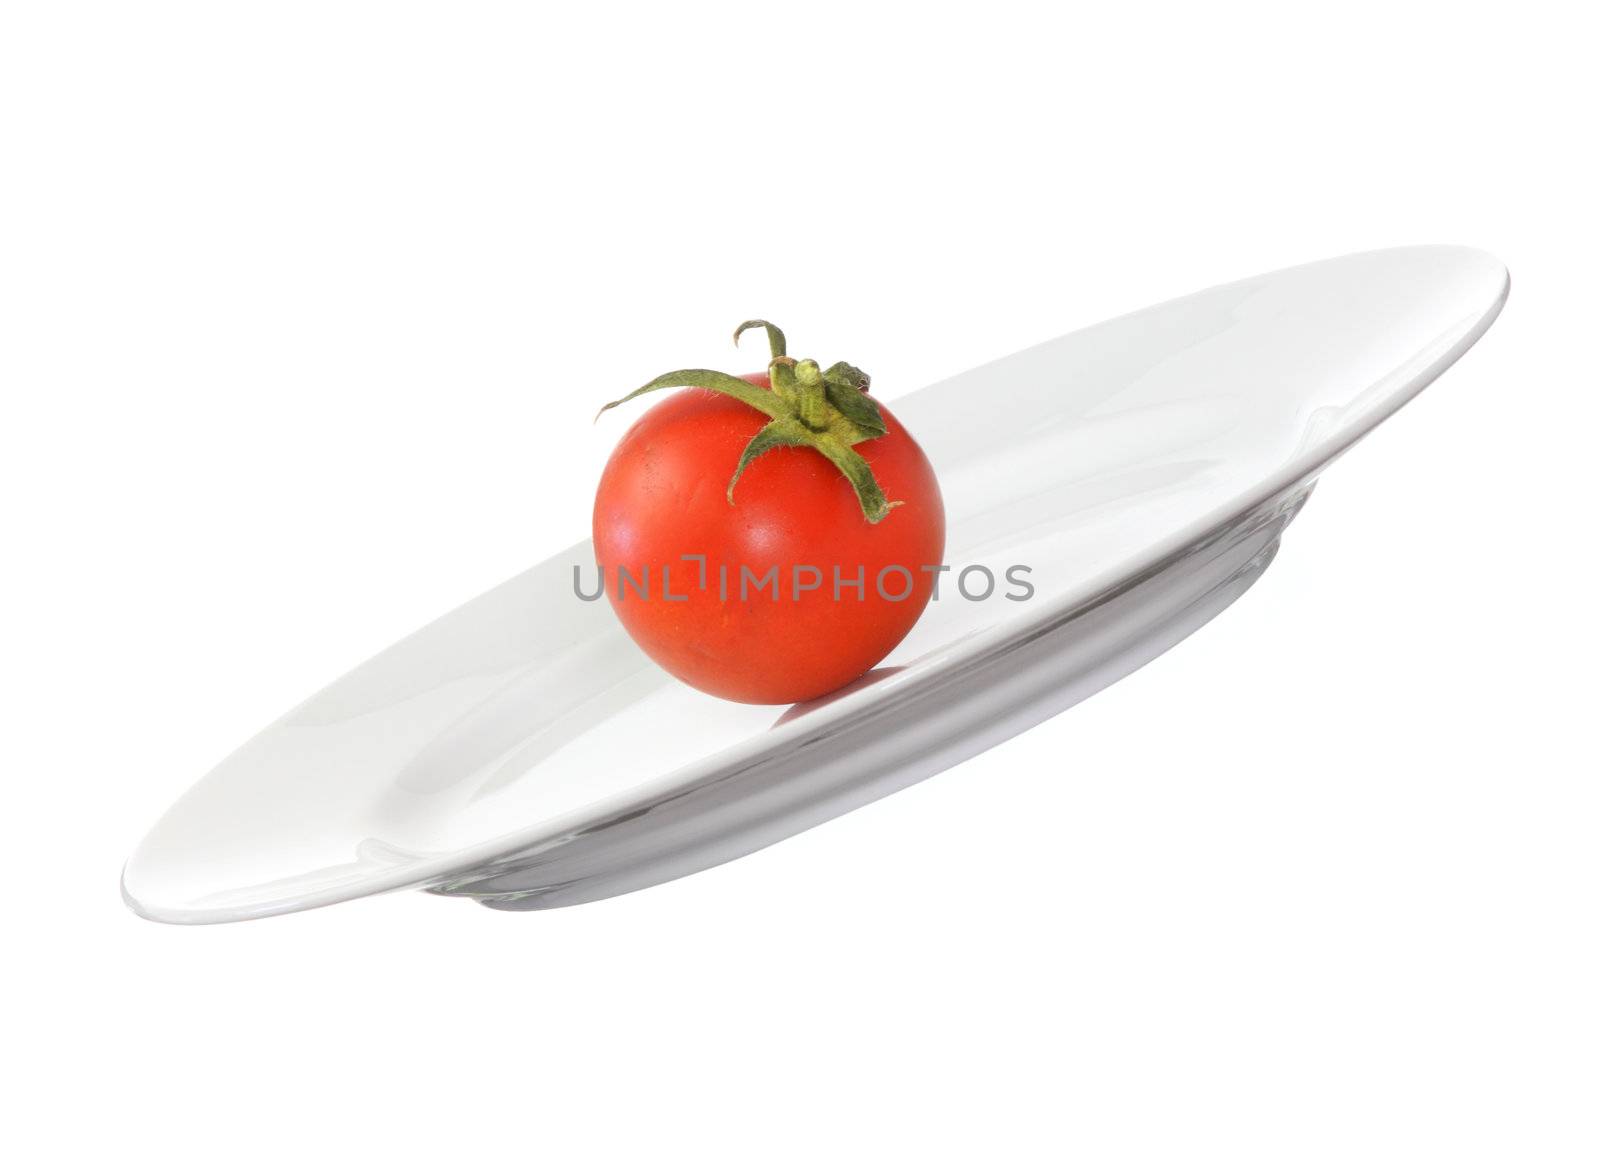 Tomato on plate isolated on white background